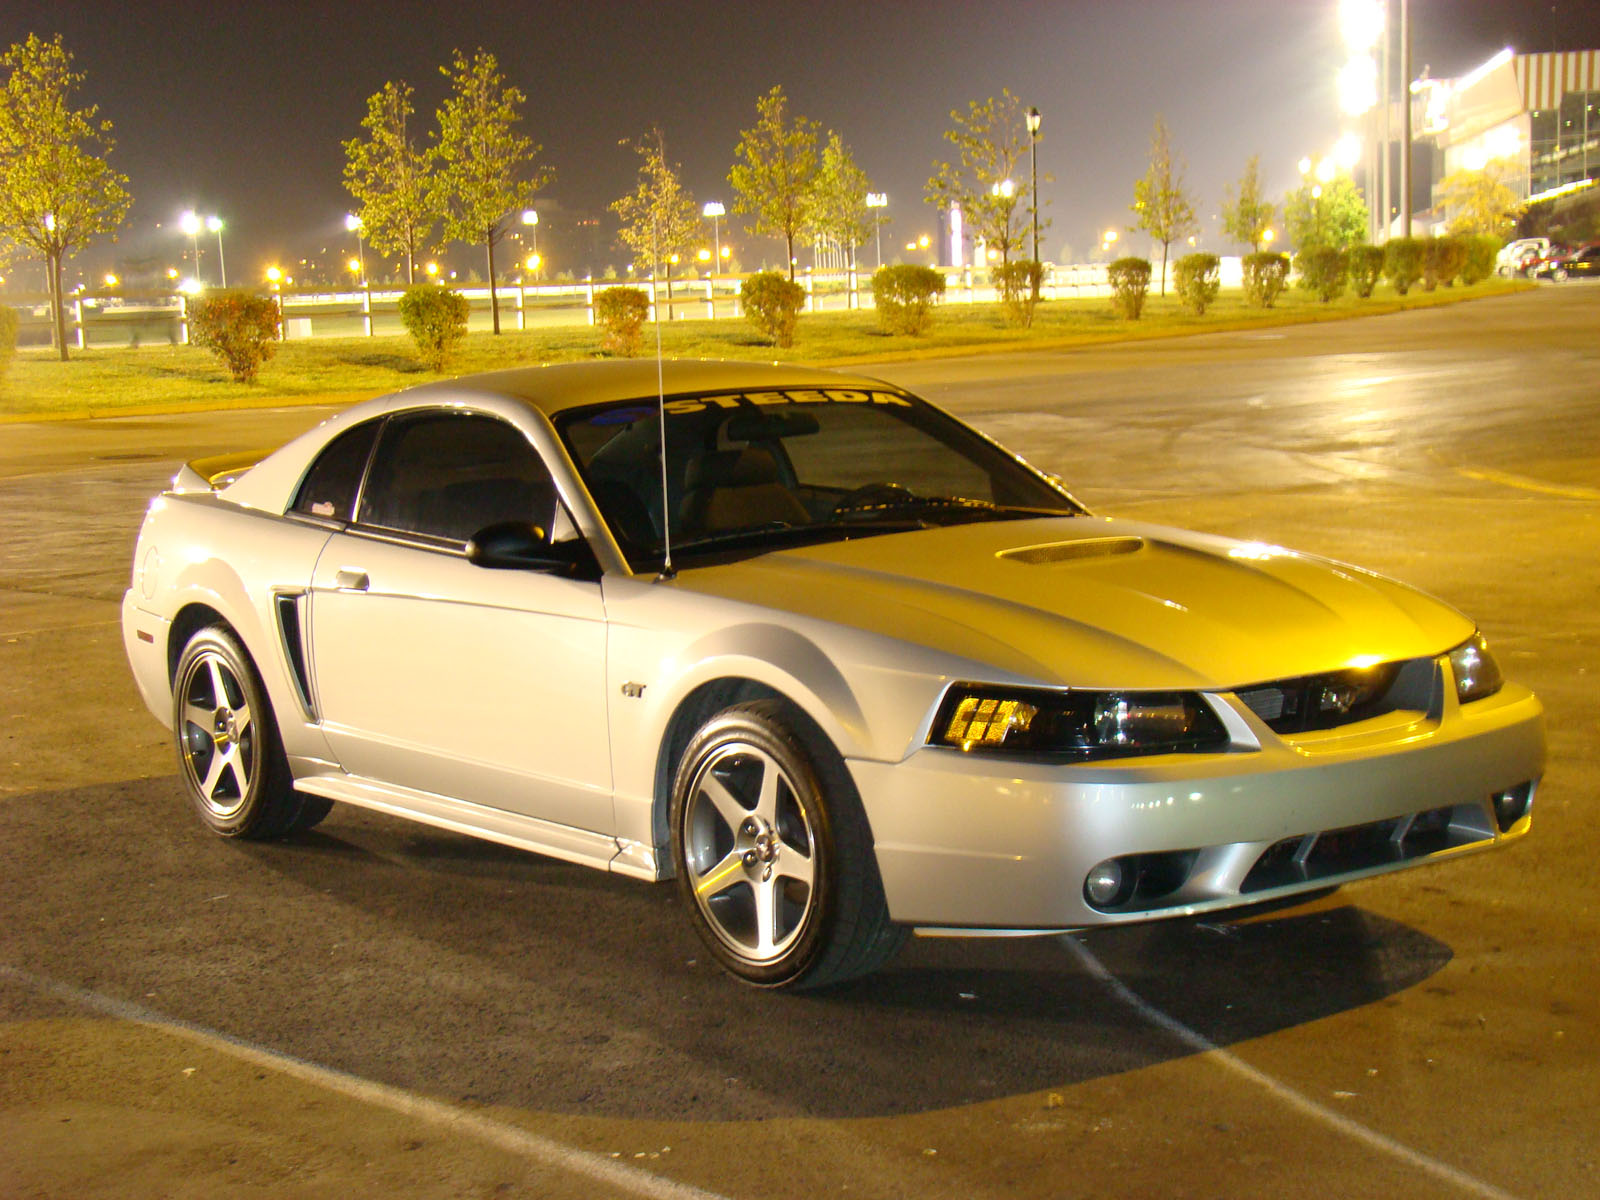 2000 Ford mustang gt 0-60 times #6